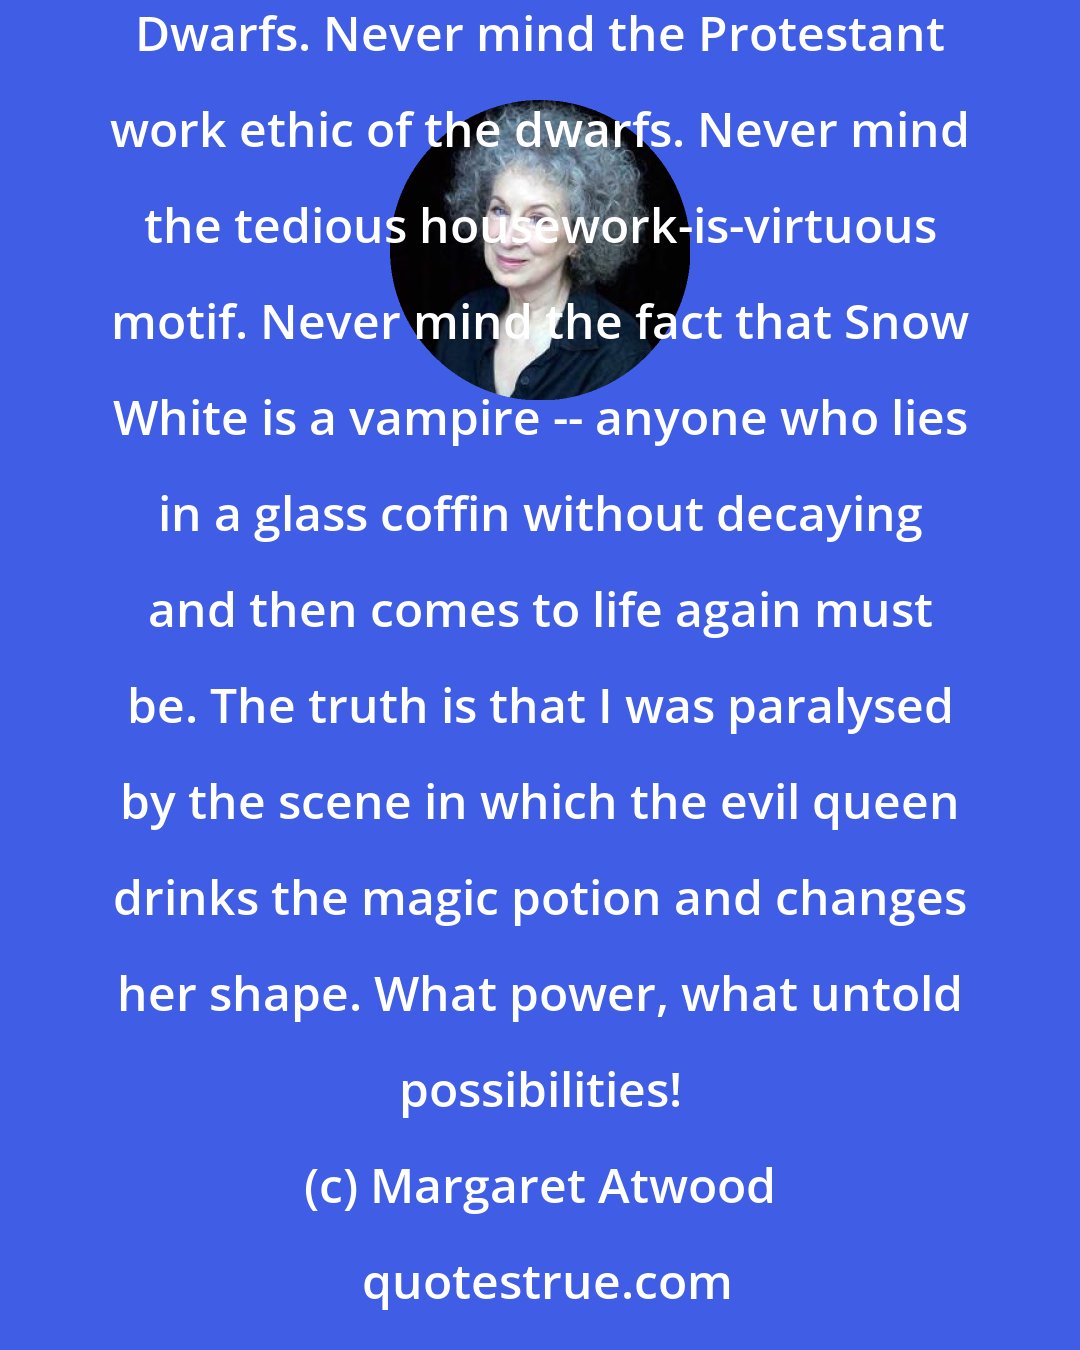 Margaret Atwood: I have always known that there were spellbinding evil parts for women. For one thing, I was taken at an early age to see Snow White and the Seven Dwarfs. Never mind the Protestant work ethic of the dwarfs. Never mind the tedious housework-is-virtuous motif. Never mind the fact that Snow White is a vampire -- anyone who lies in a glass coffin without decaying and then comes to life again must be. The truth is that I was paralysed by the scene in which the evil queen drinks the magic potion and changes her shape. What power, what untold possibilities!